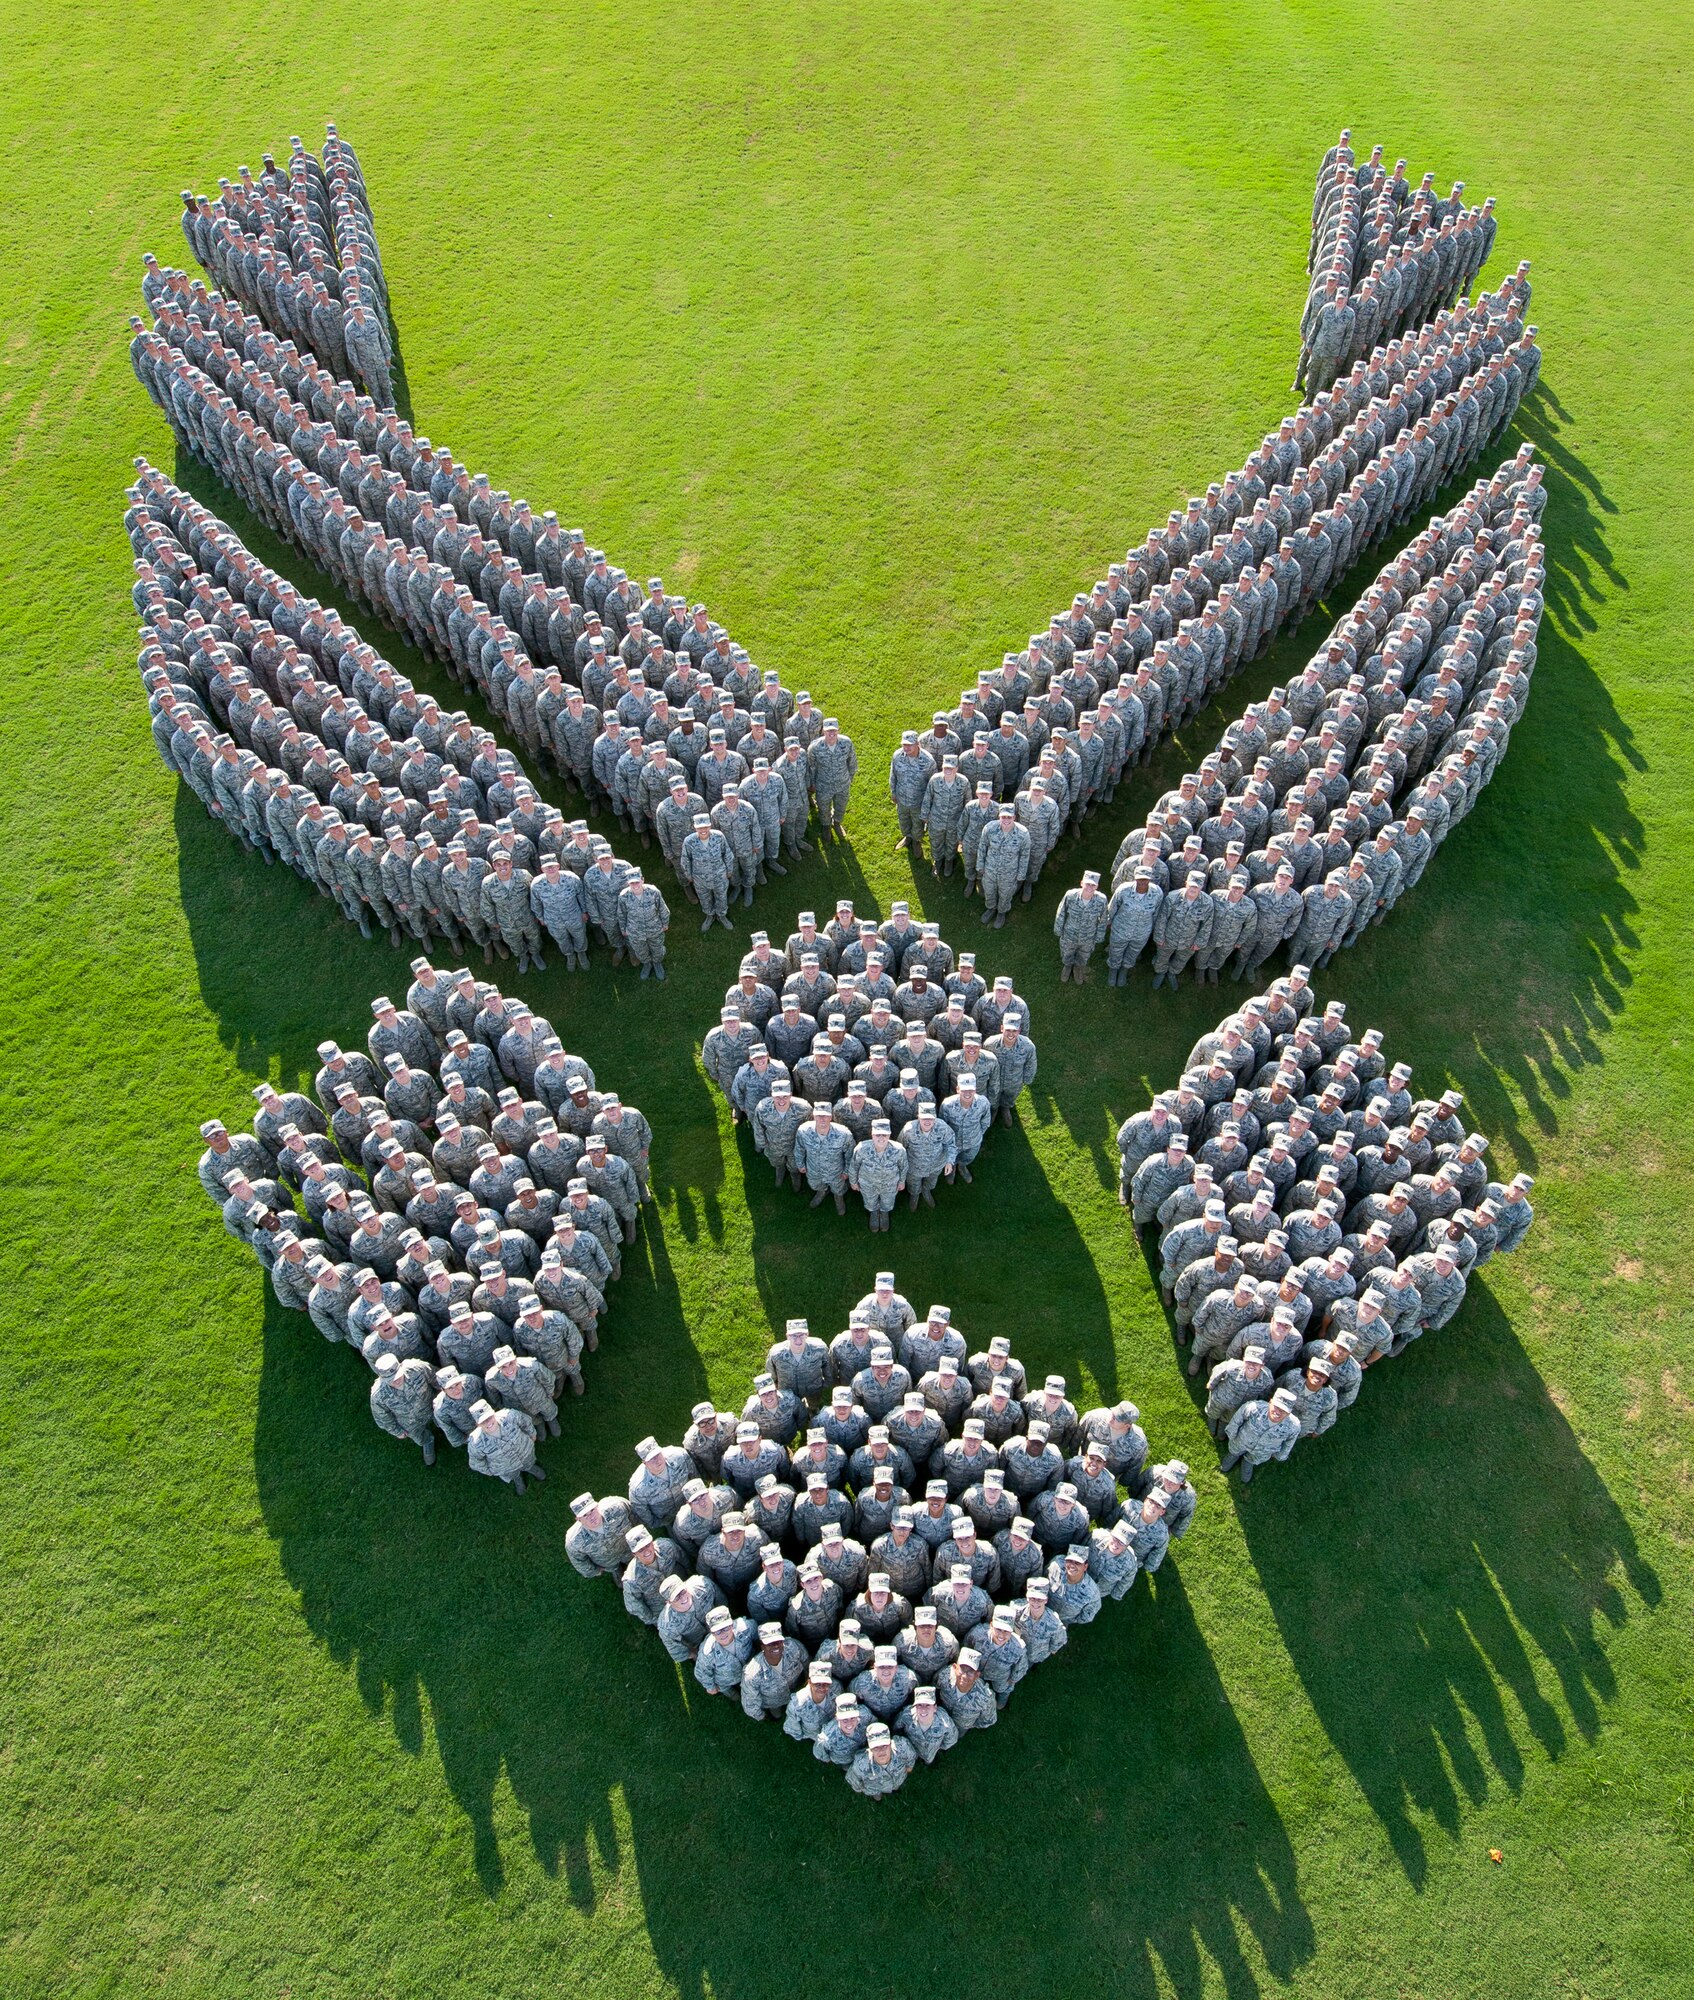 More than 650 Air Force captains from Air University's Squadron Officer School Class 14E at Maxwell Air Force Base, Ala., form-up to make an image of the Air Force Symbol in honor of the 67th Air Force Birthday. (Photo illustration by Donna Burnett)